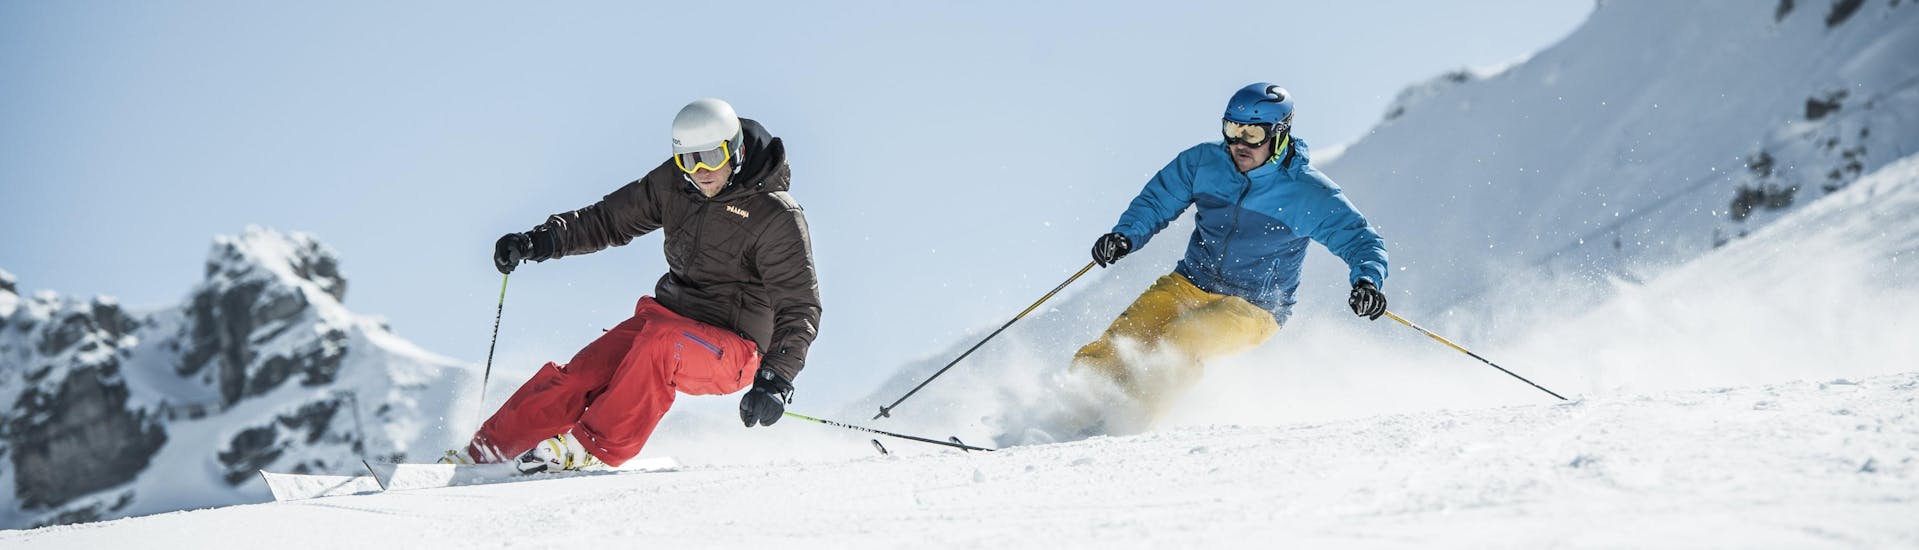 A skier practices the correct skiing technique during one of the private lessons in Masella.